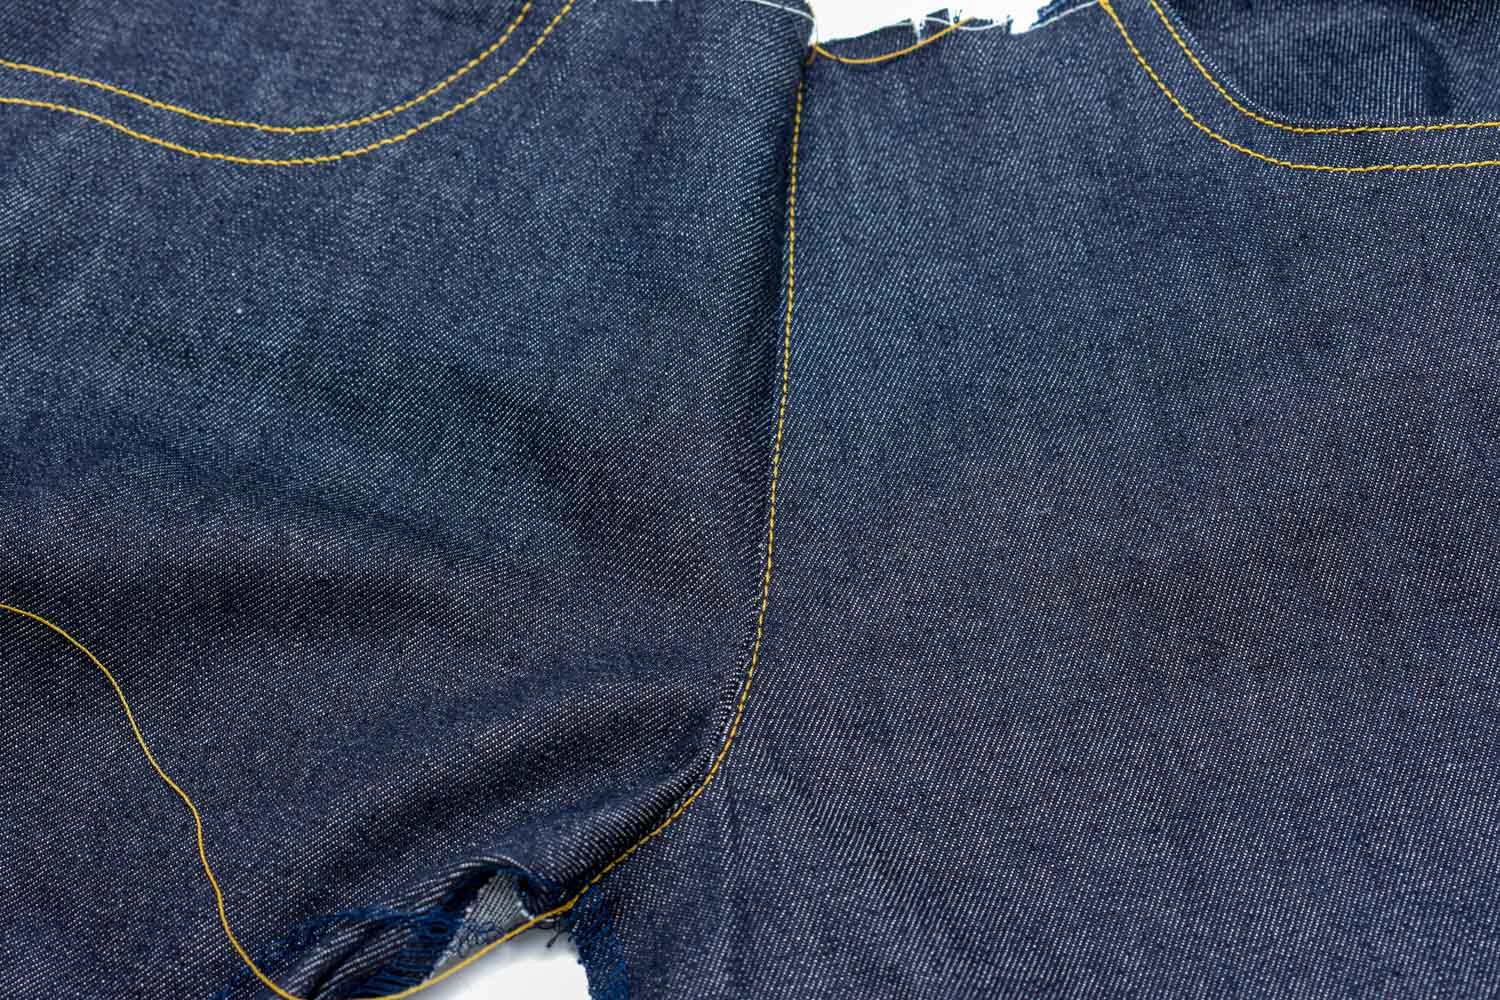 how to sew jeans zipper with fly shield-4 - The Last Stitch